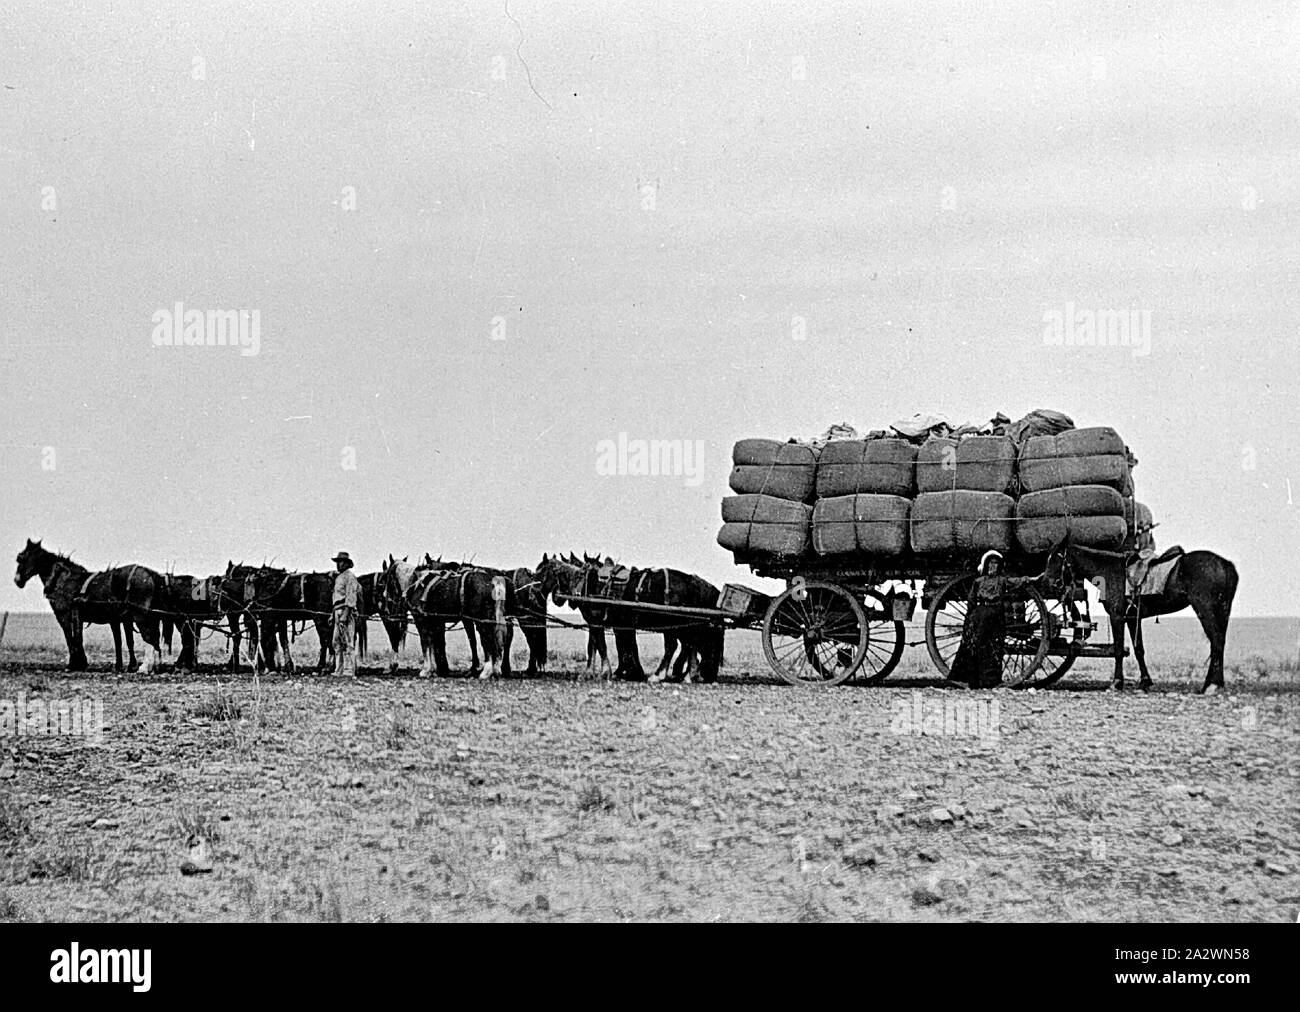 Negative - Horse Drawn Wagon Laden With Wool Bales on 'Portland Downs' Station, Isisford District, Queensland, circa 1915, Horsedrawn wagon laden with wool bales on 'Portland Downs' station Stock Photo